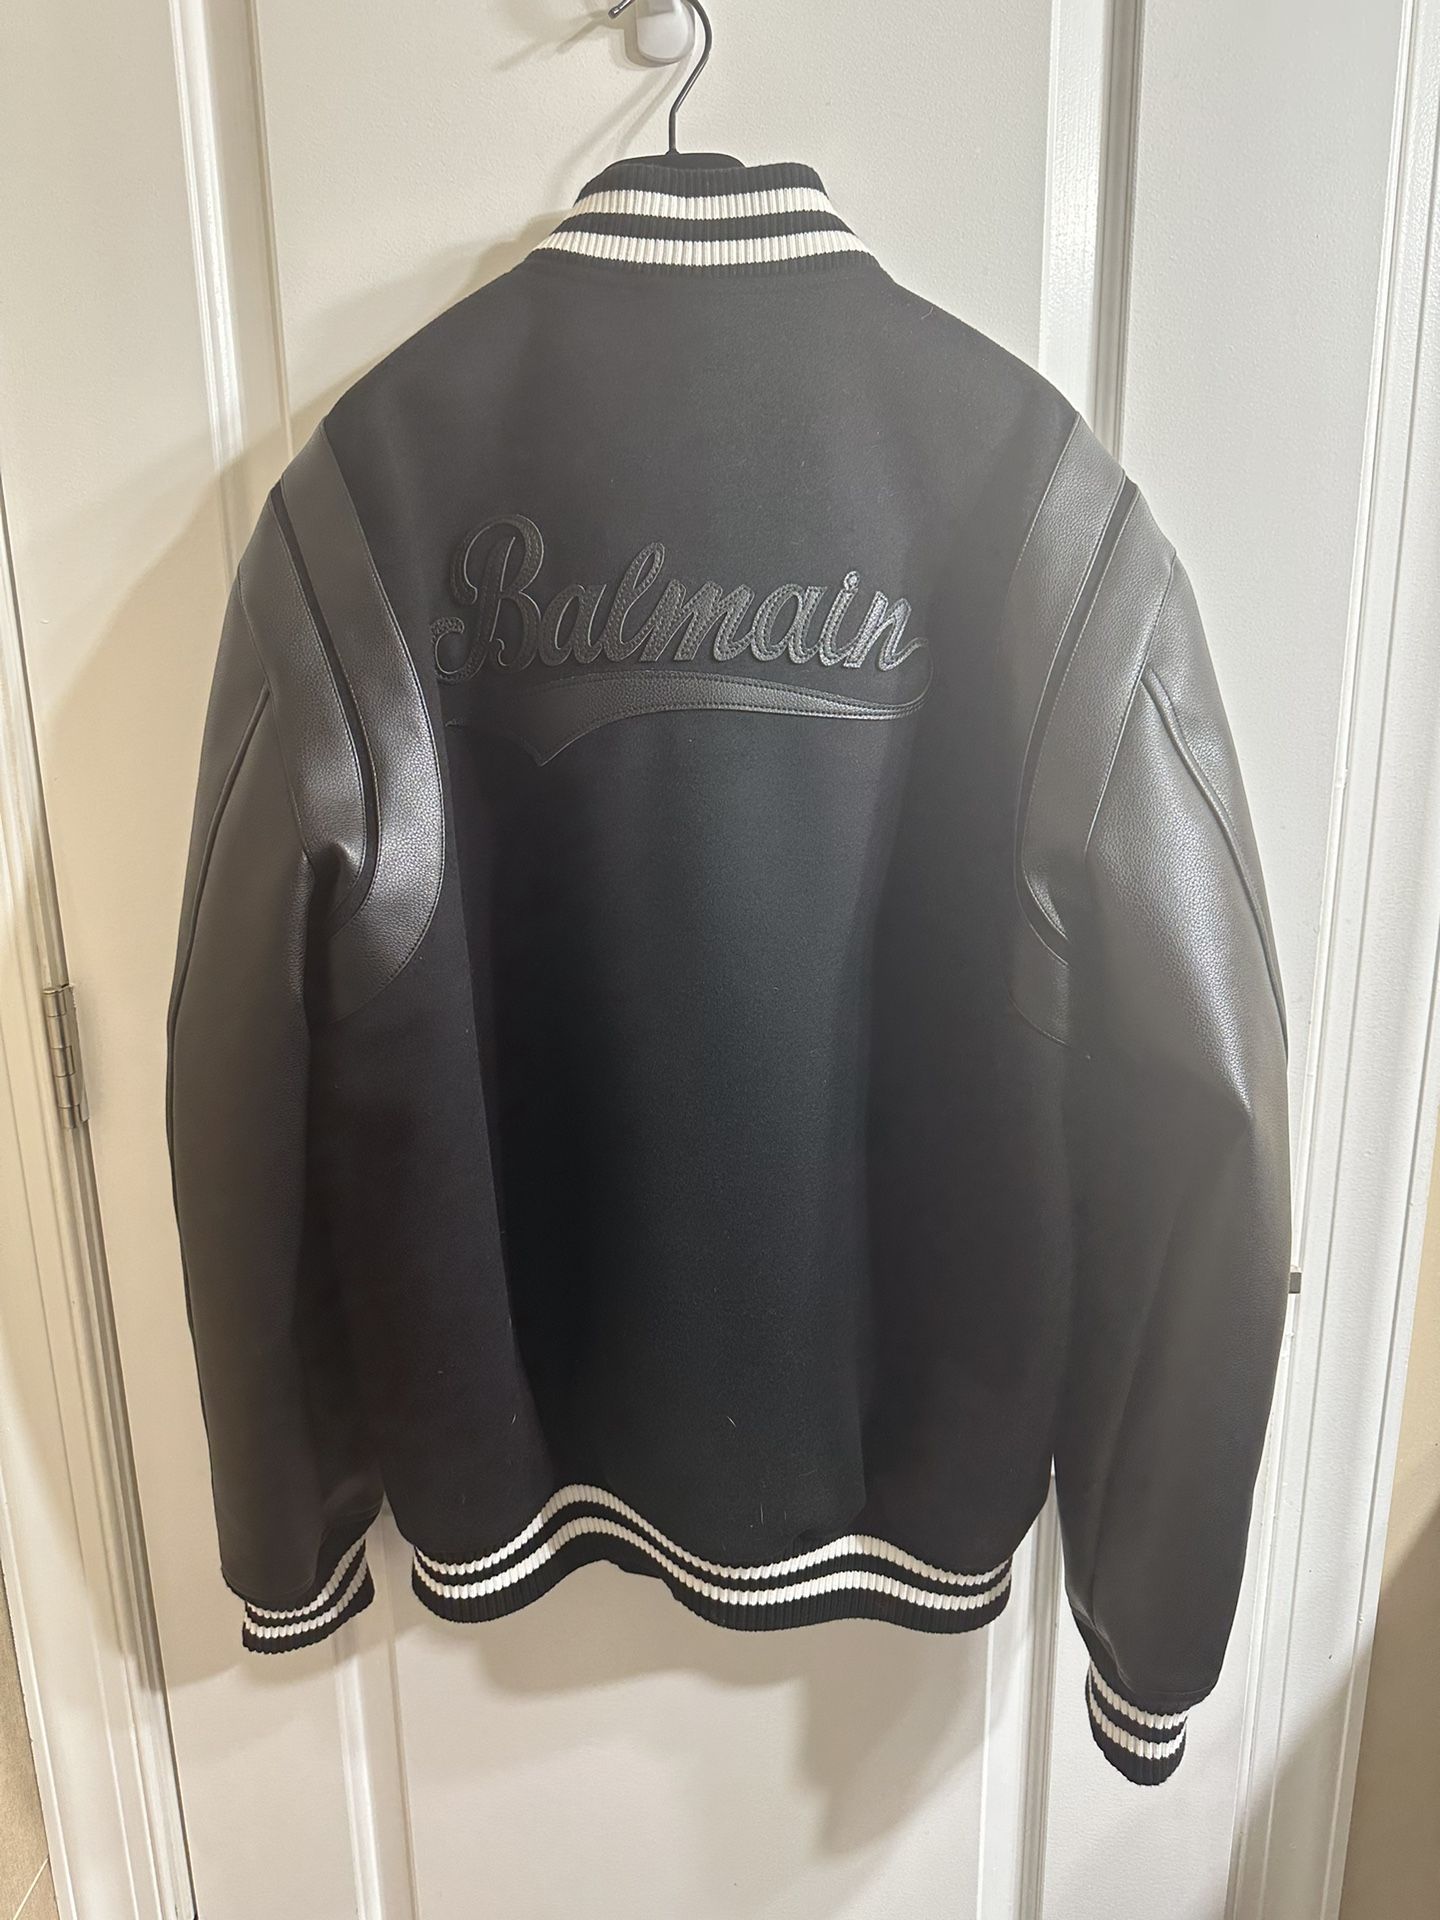 Balmain Bomber Jacket Black Size for in Chicago, OfferUp